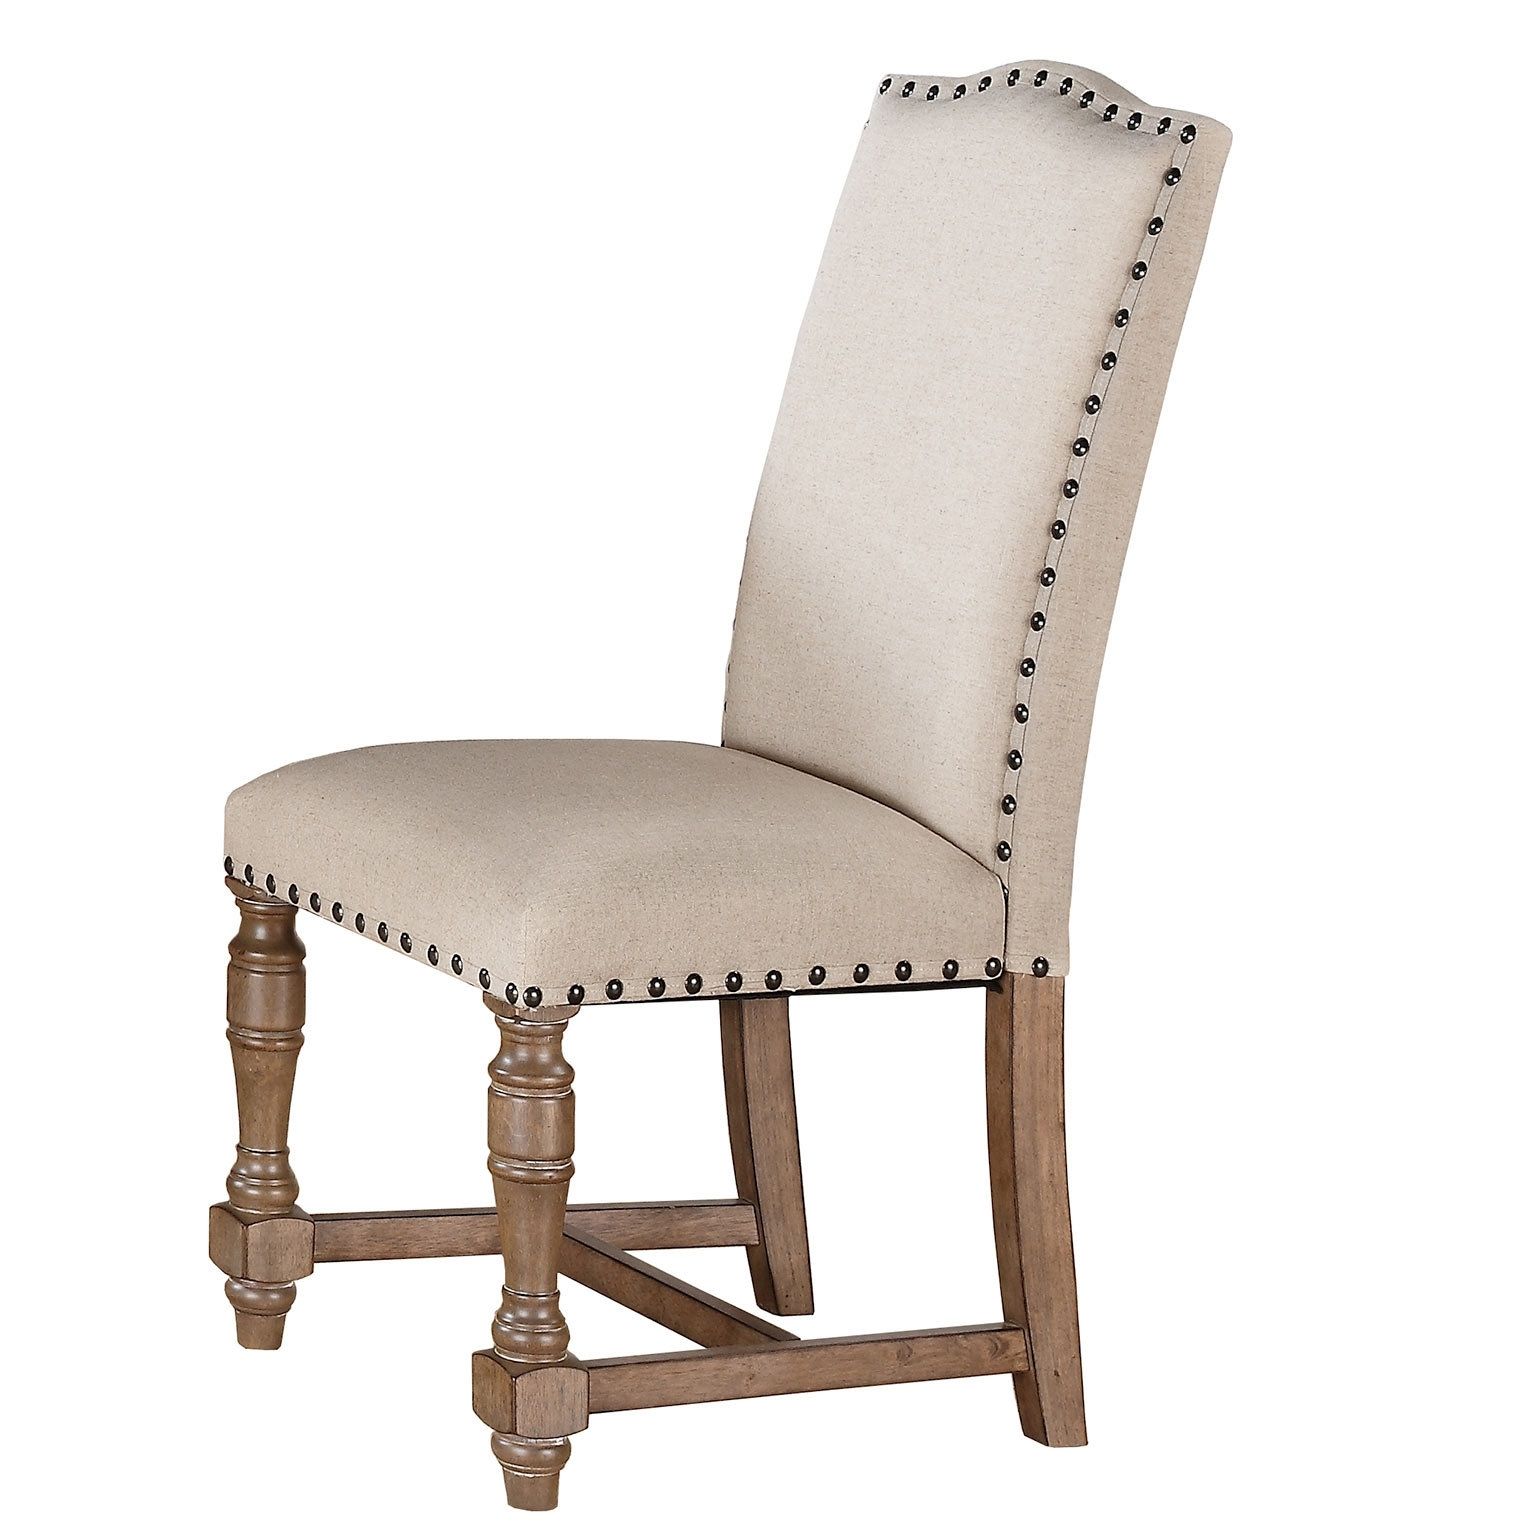 Most Recently Released Joss Side Chairs Regarding Laurel Foundry Modern Farmhouse Fortunat Side Chair & Reviews (View 13 of 20)